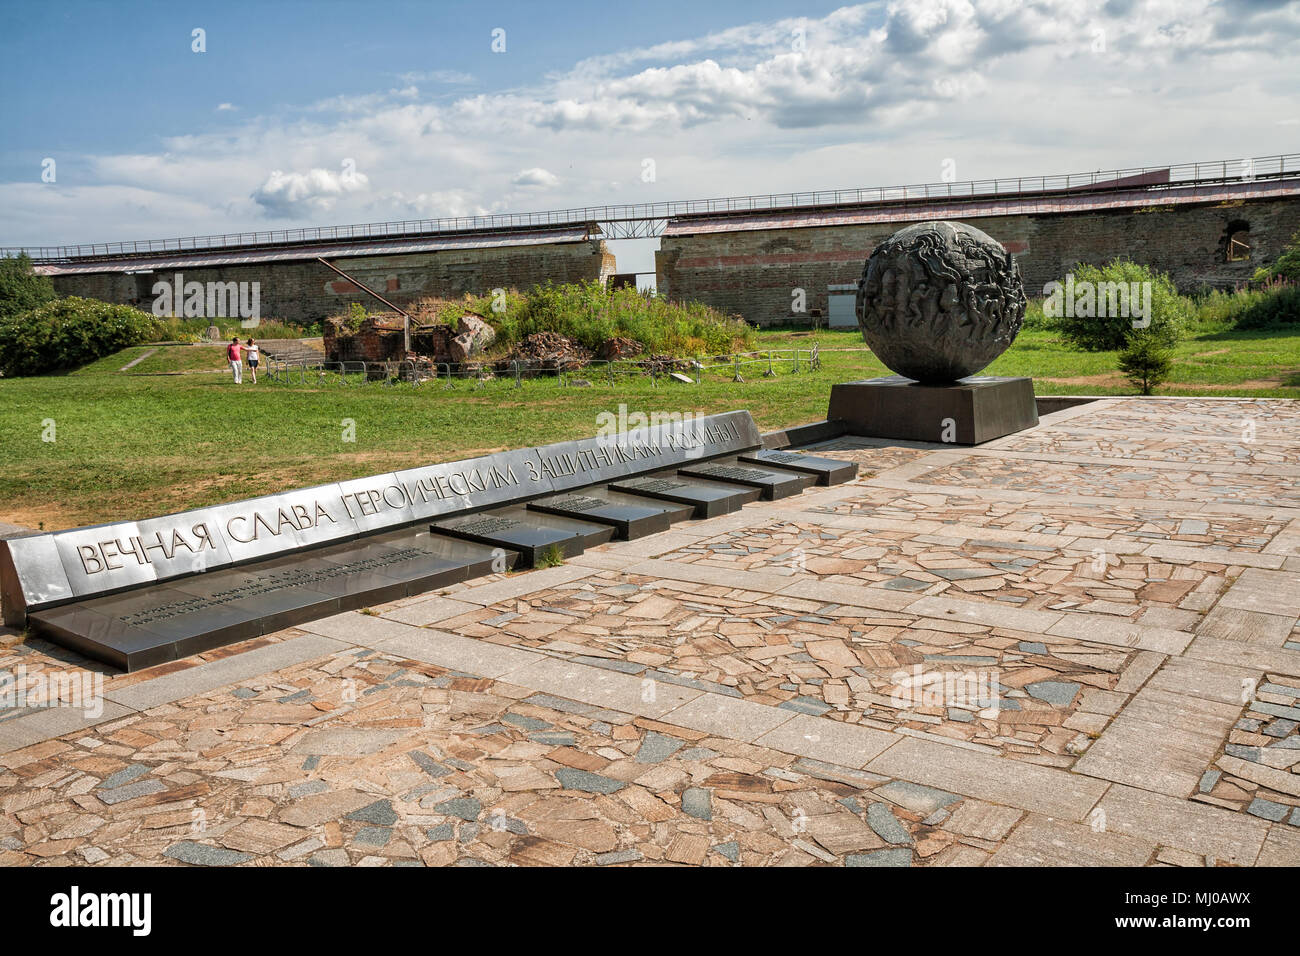 SHLISSELBURG, RUSSIA - AUGUST 02, 2014: People visit monument to heroic defenders of Oreshek Fortress in Great Patriotic War. Inscription on plate 'Et Stock Photo